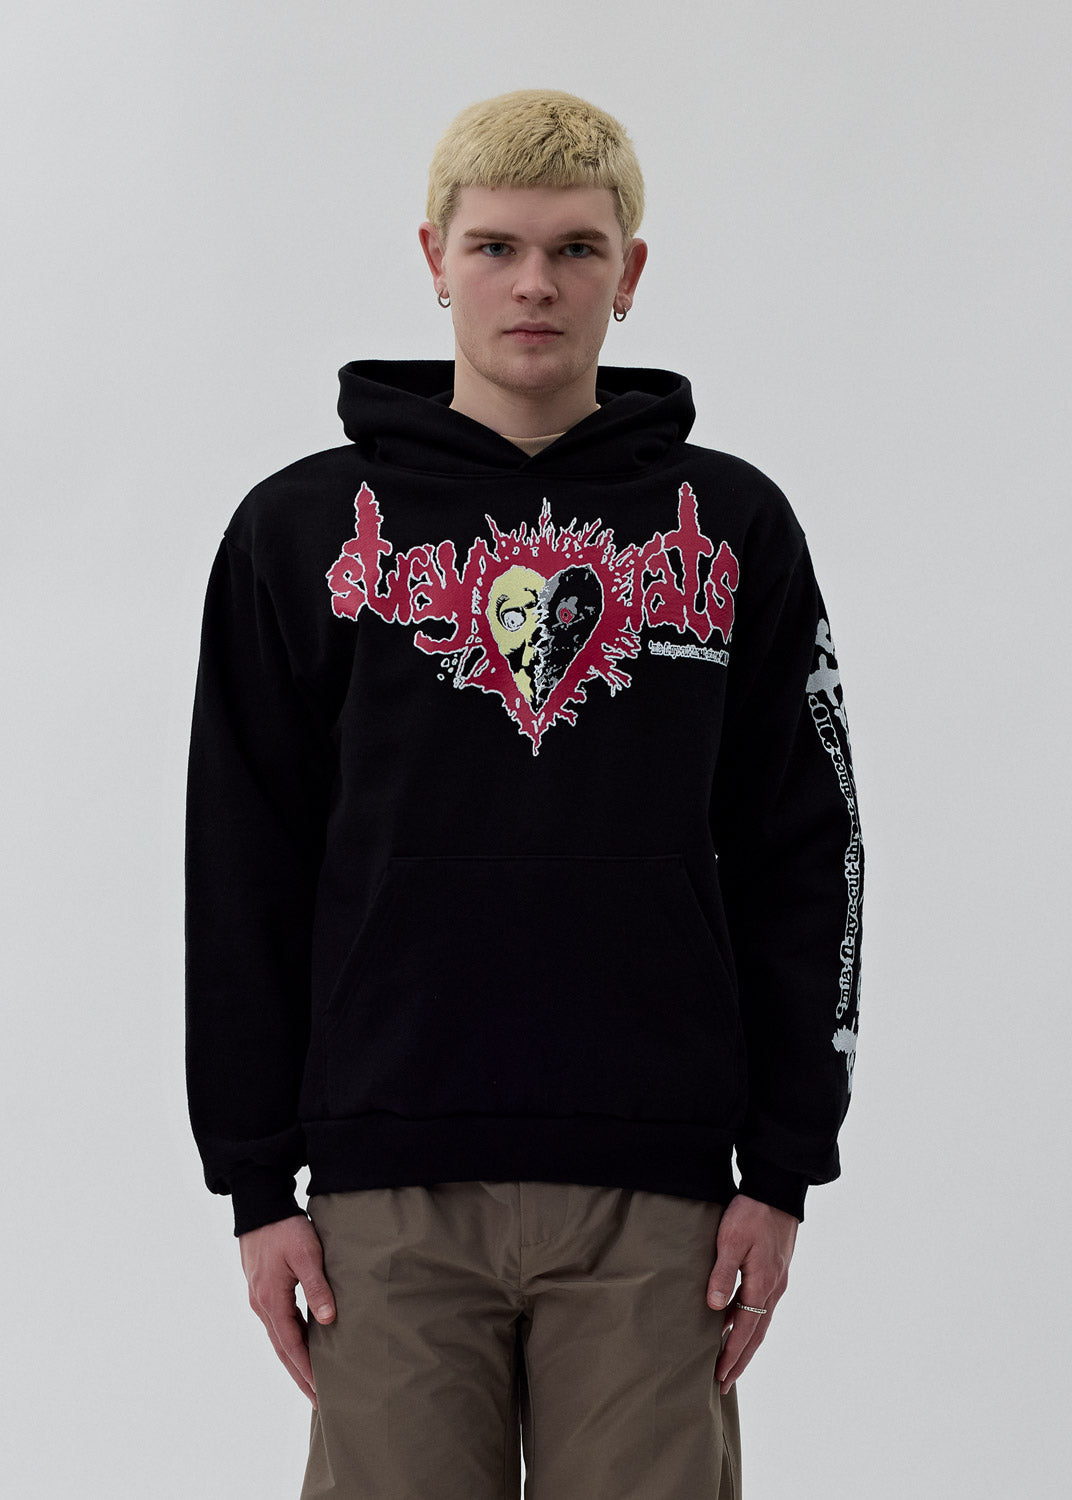 Stray Rats - Black Cutthroat Hoodie | 1032 SPACE